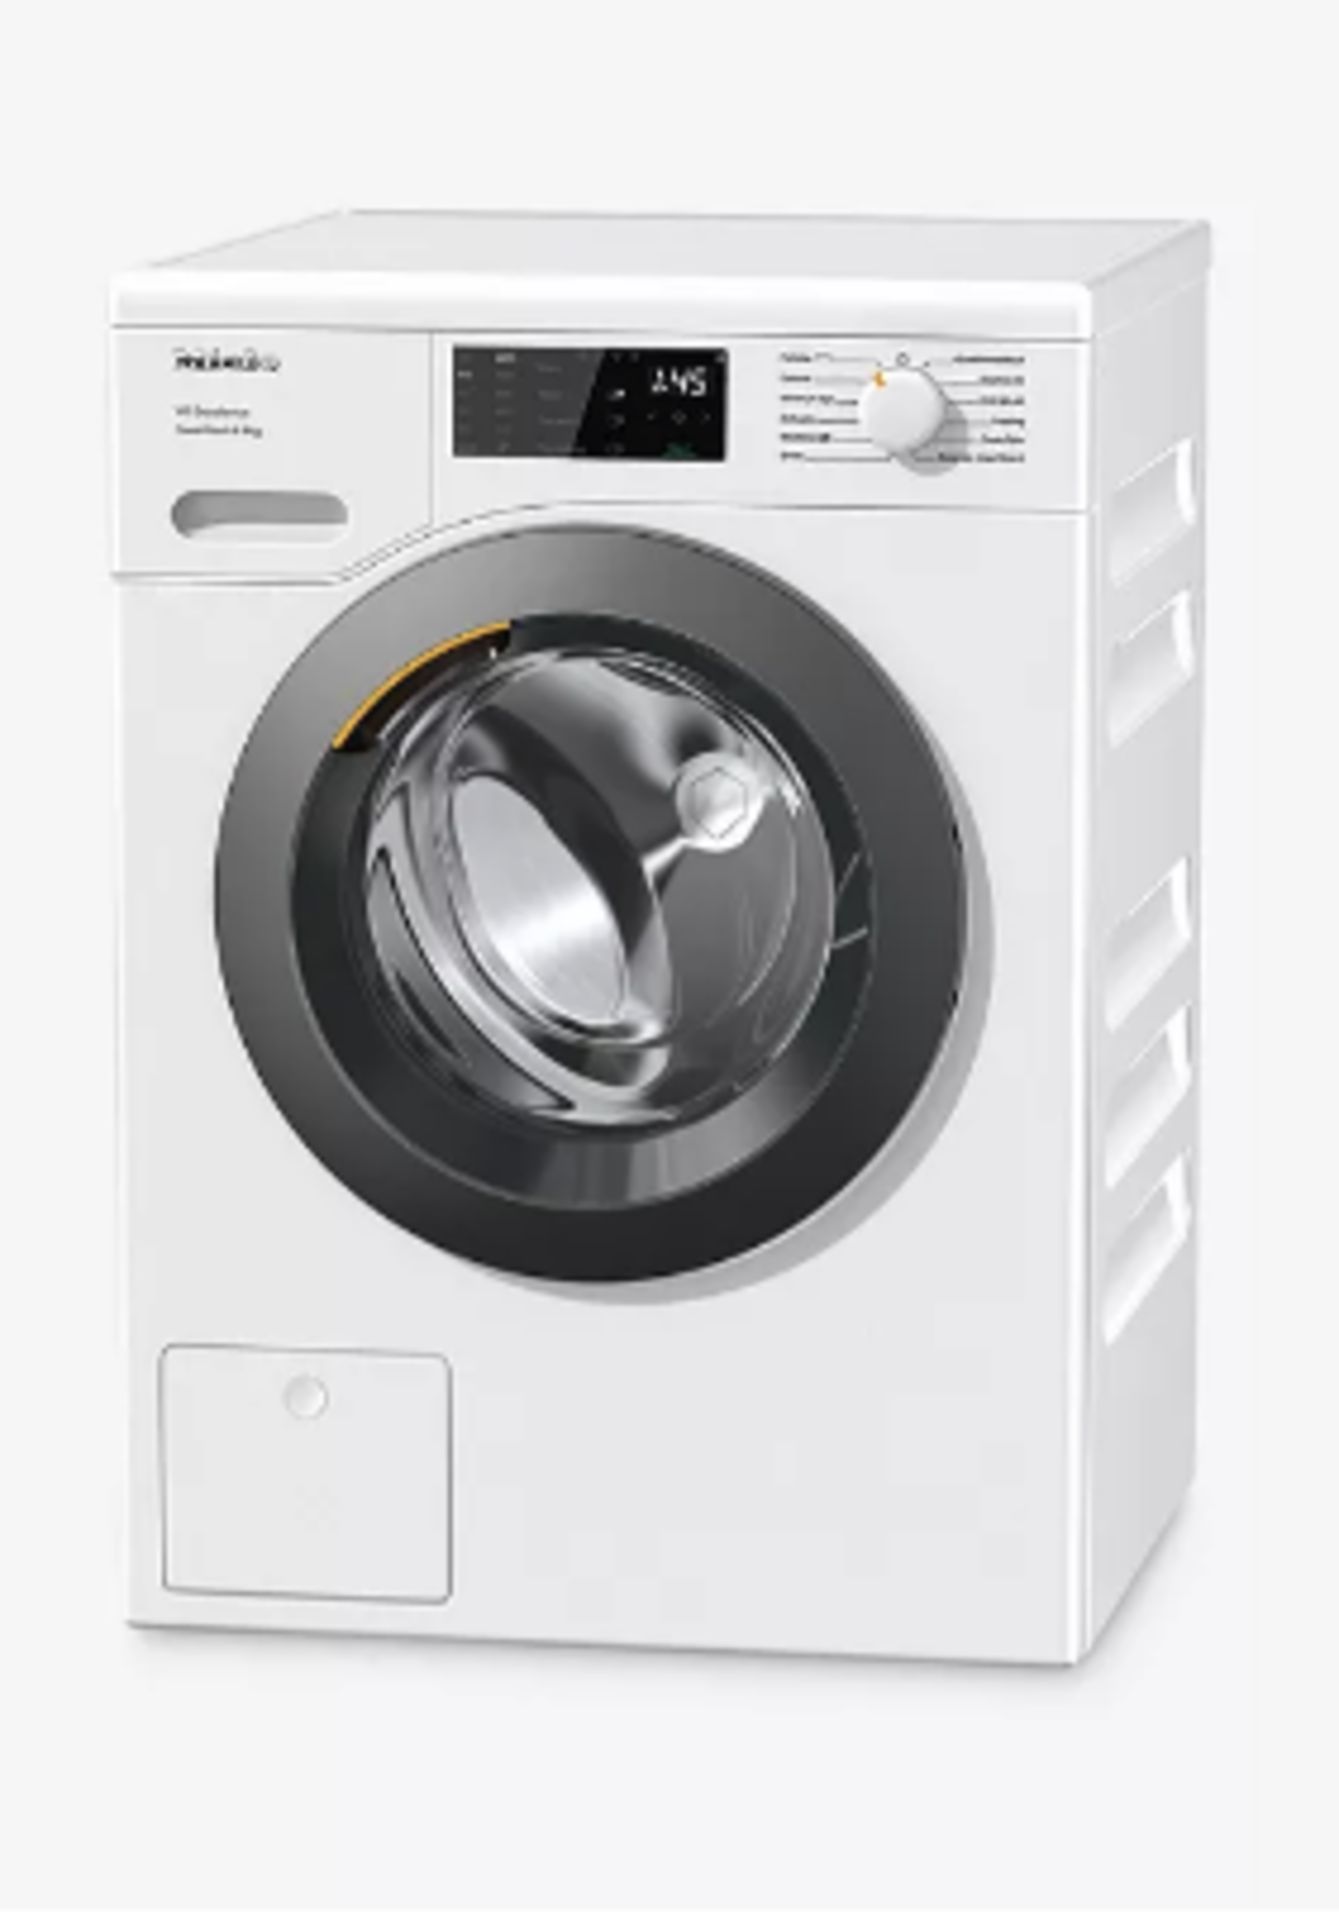 Item Description - Miele WED325 Freestanding Washing Machine, 8kg Load, 1400rpm Spin, White -...